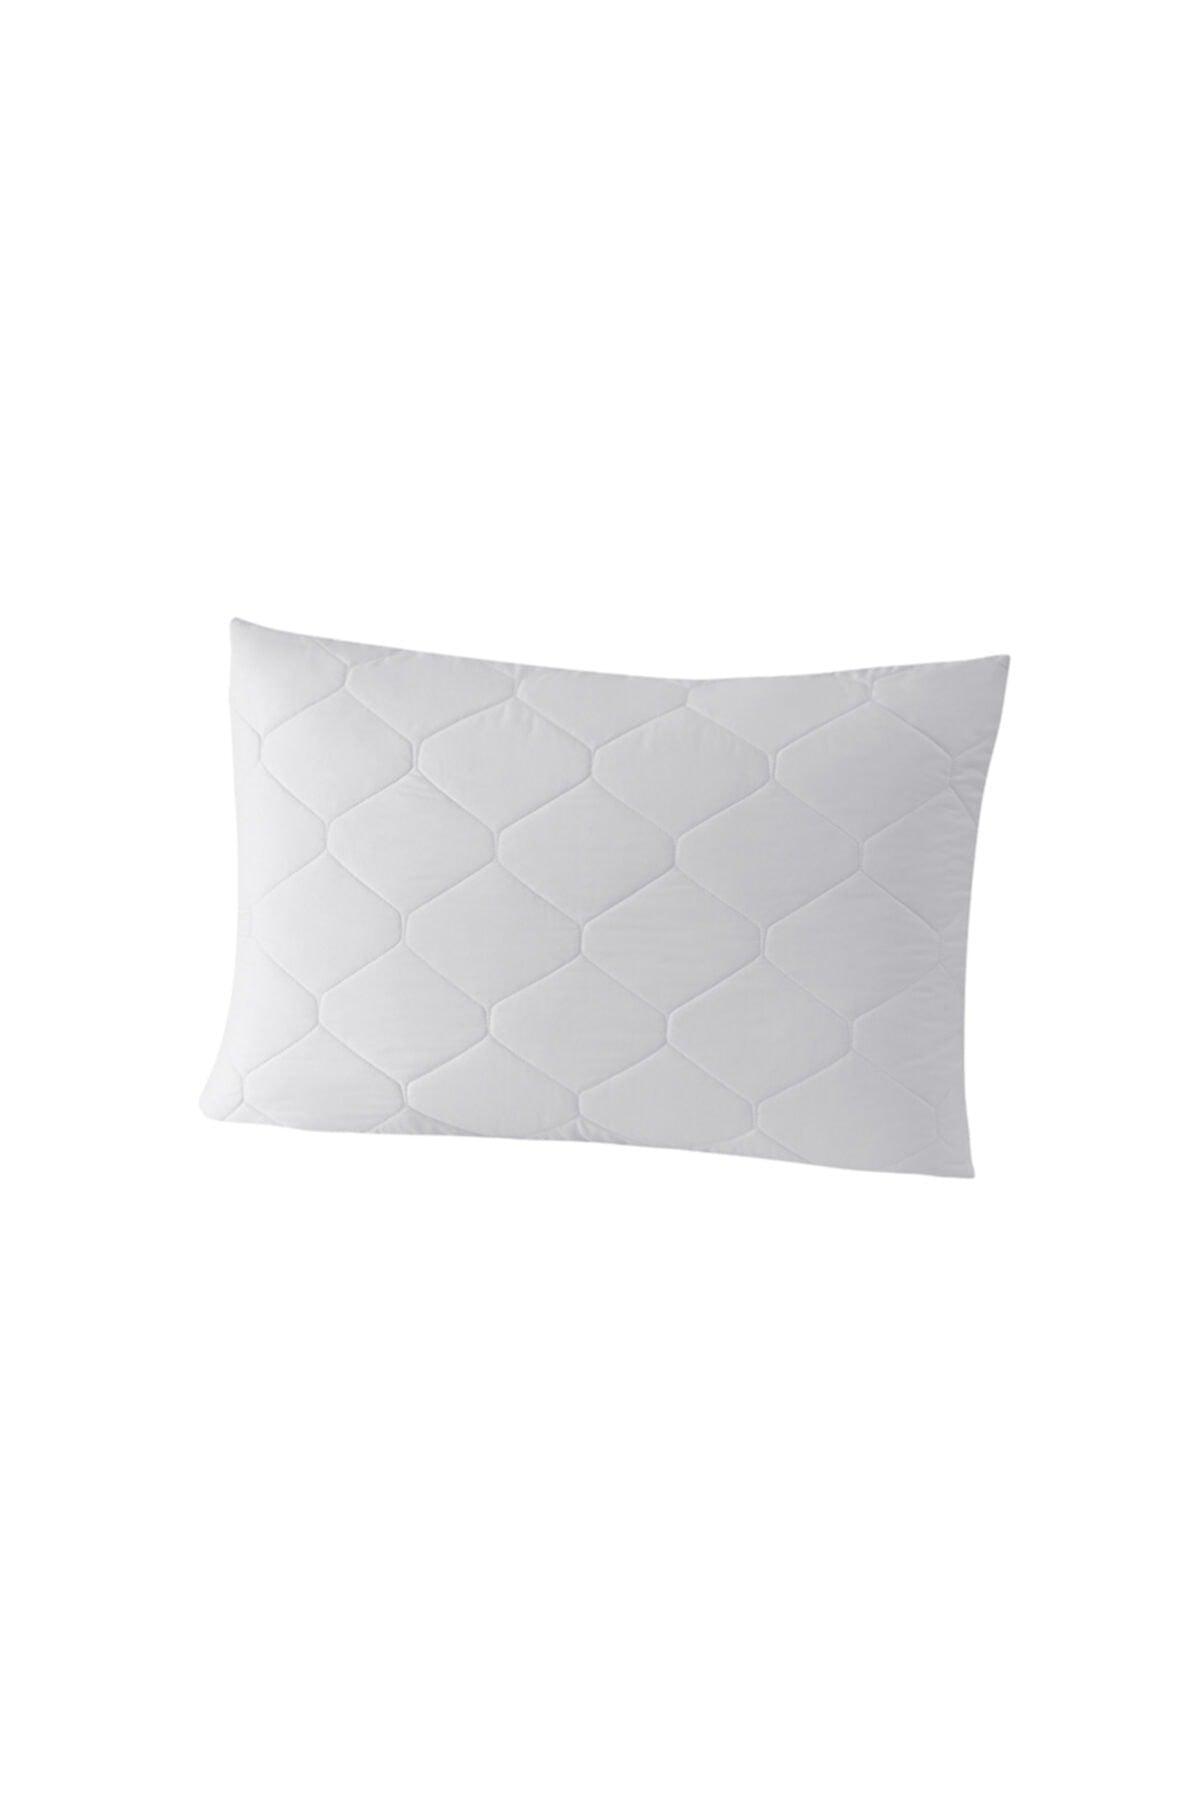 Classy Quilted Protective Pillow Underlayment - Swordslife